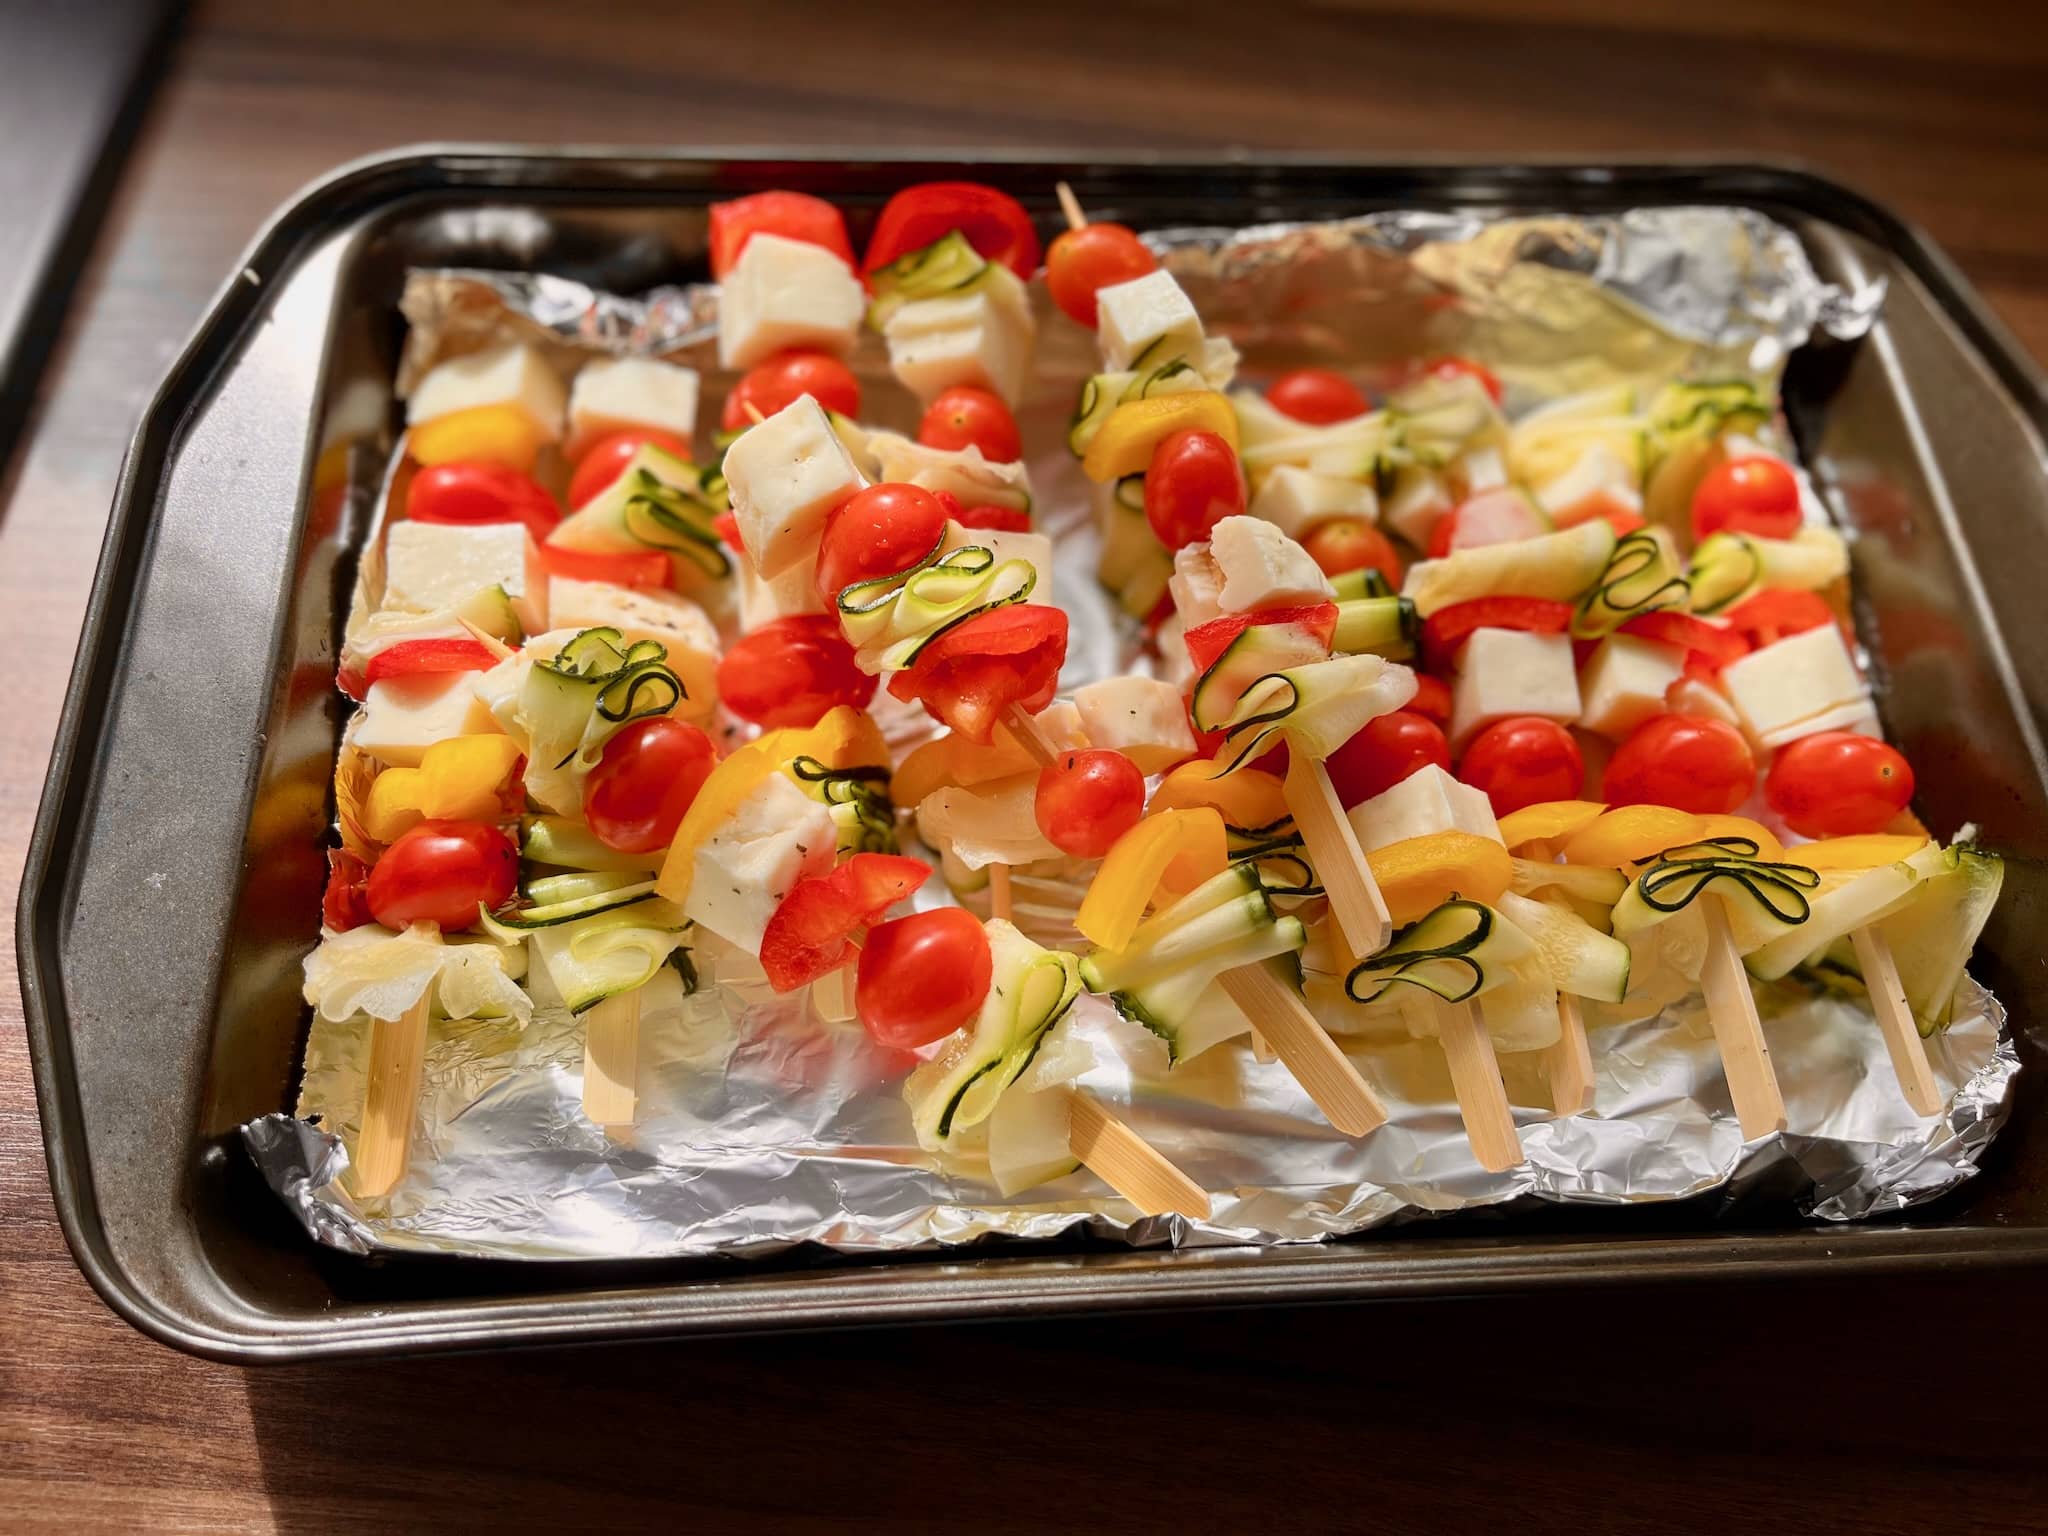 Meatless Skewers with Halloumi Cheese just before baking on a baking tray